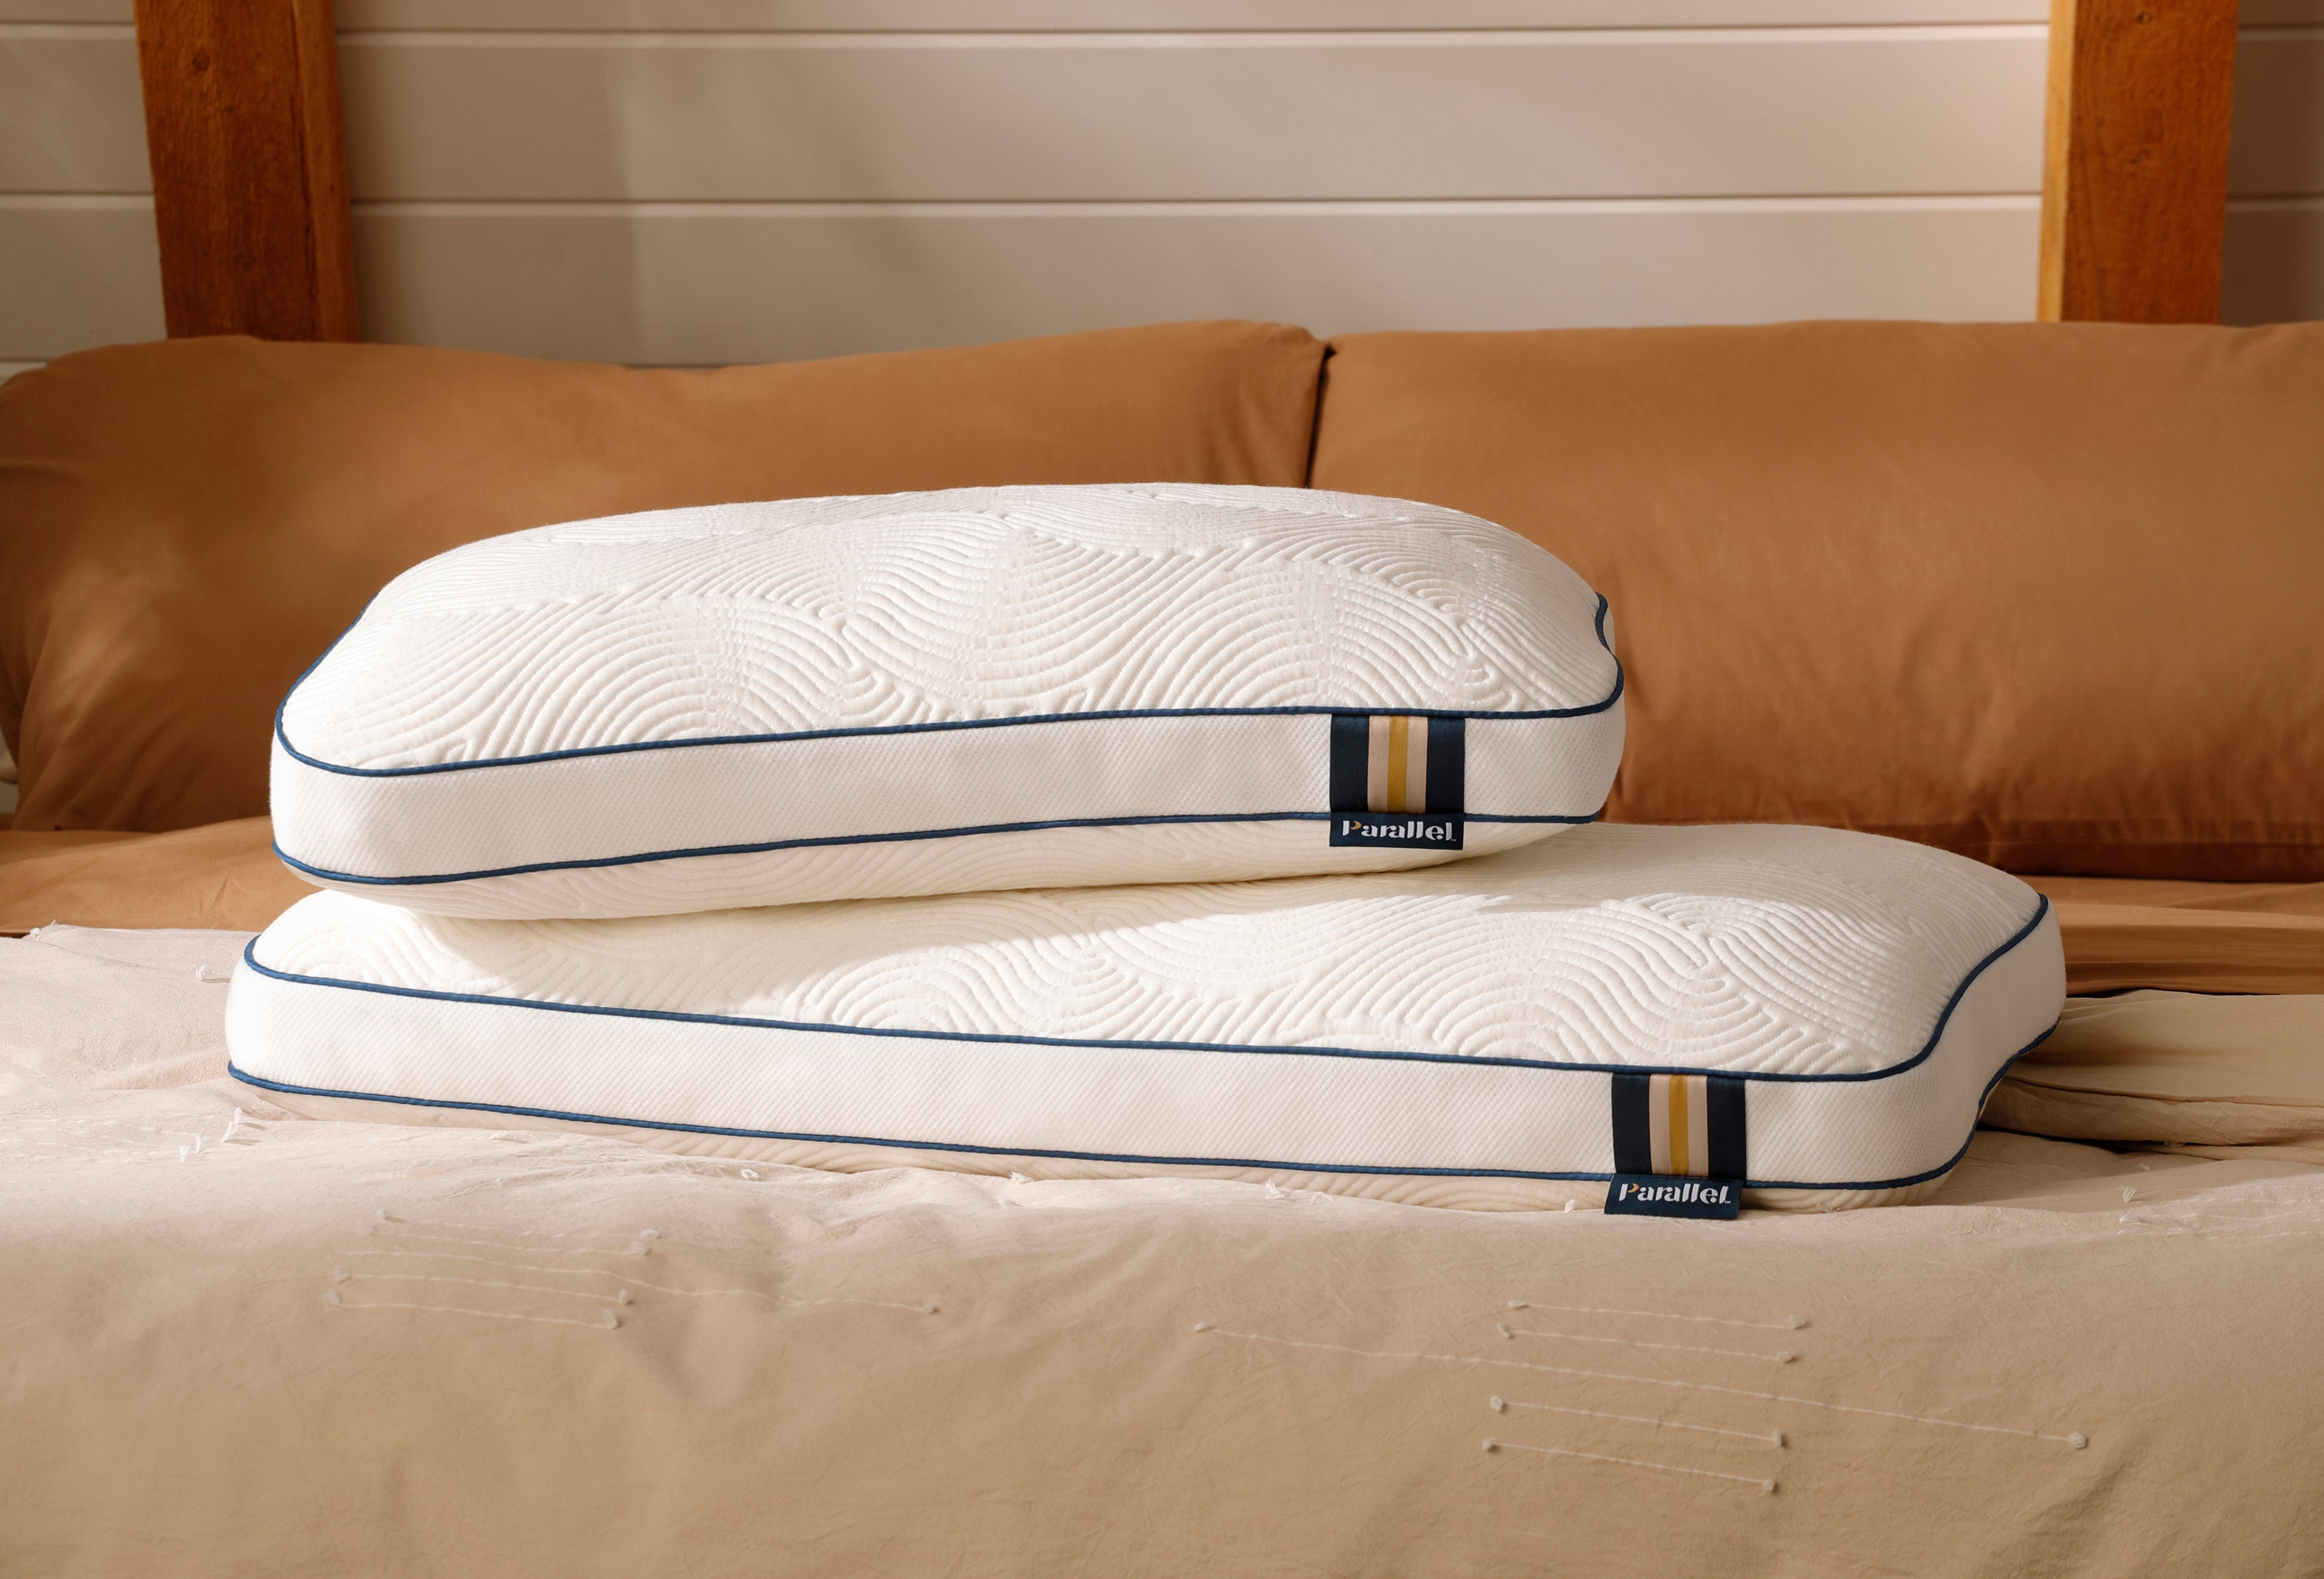 2 high profile high-end pillows stacked on stylish bed